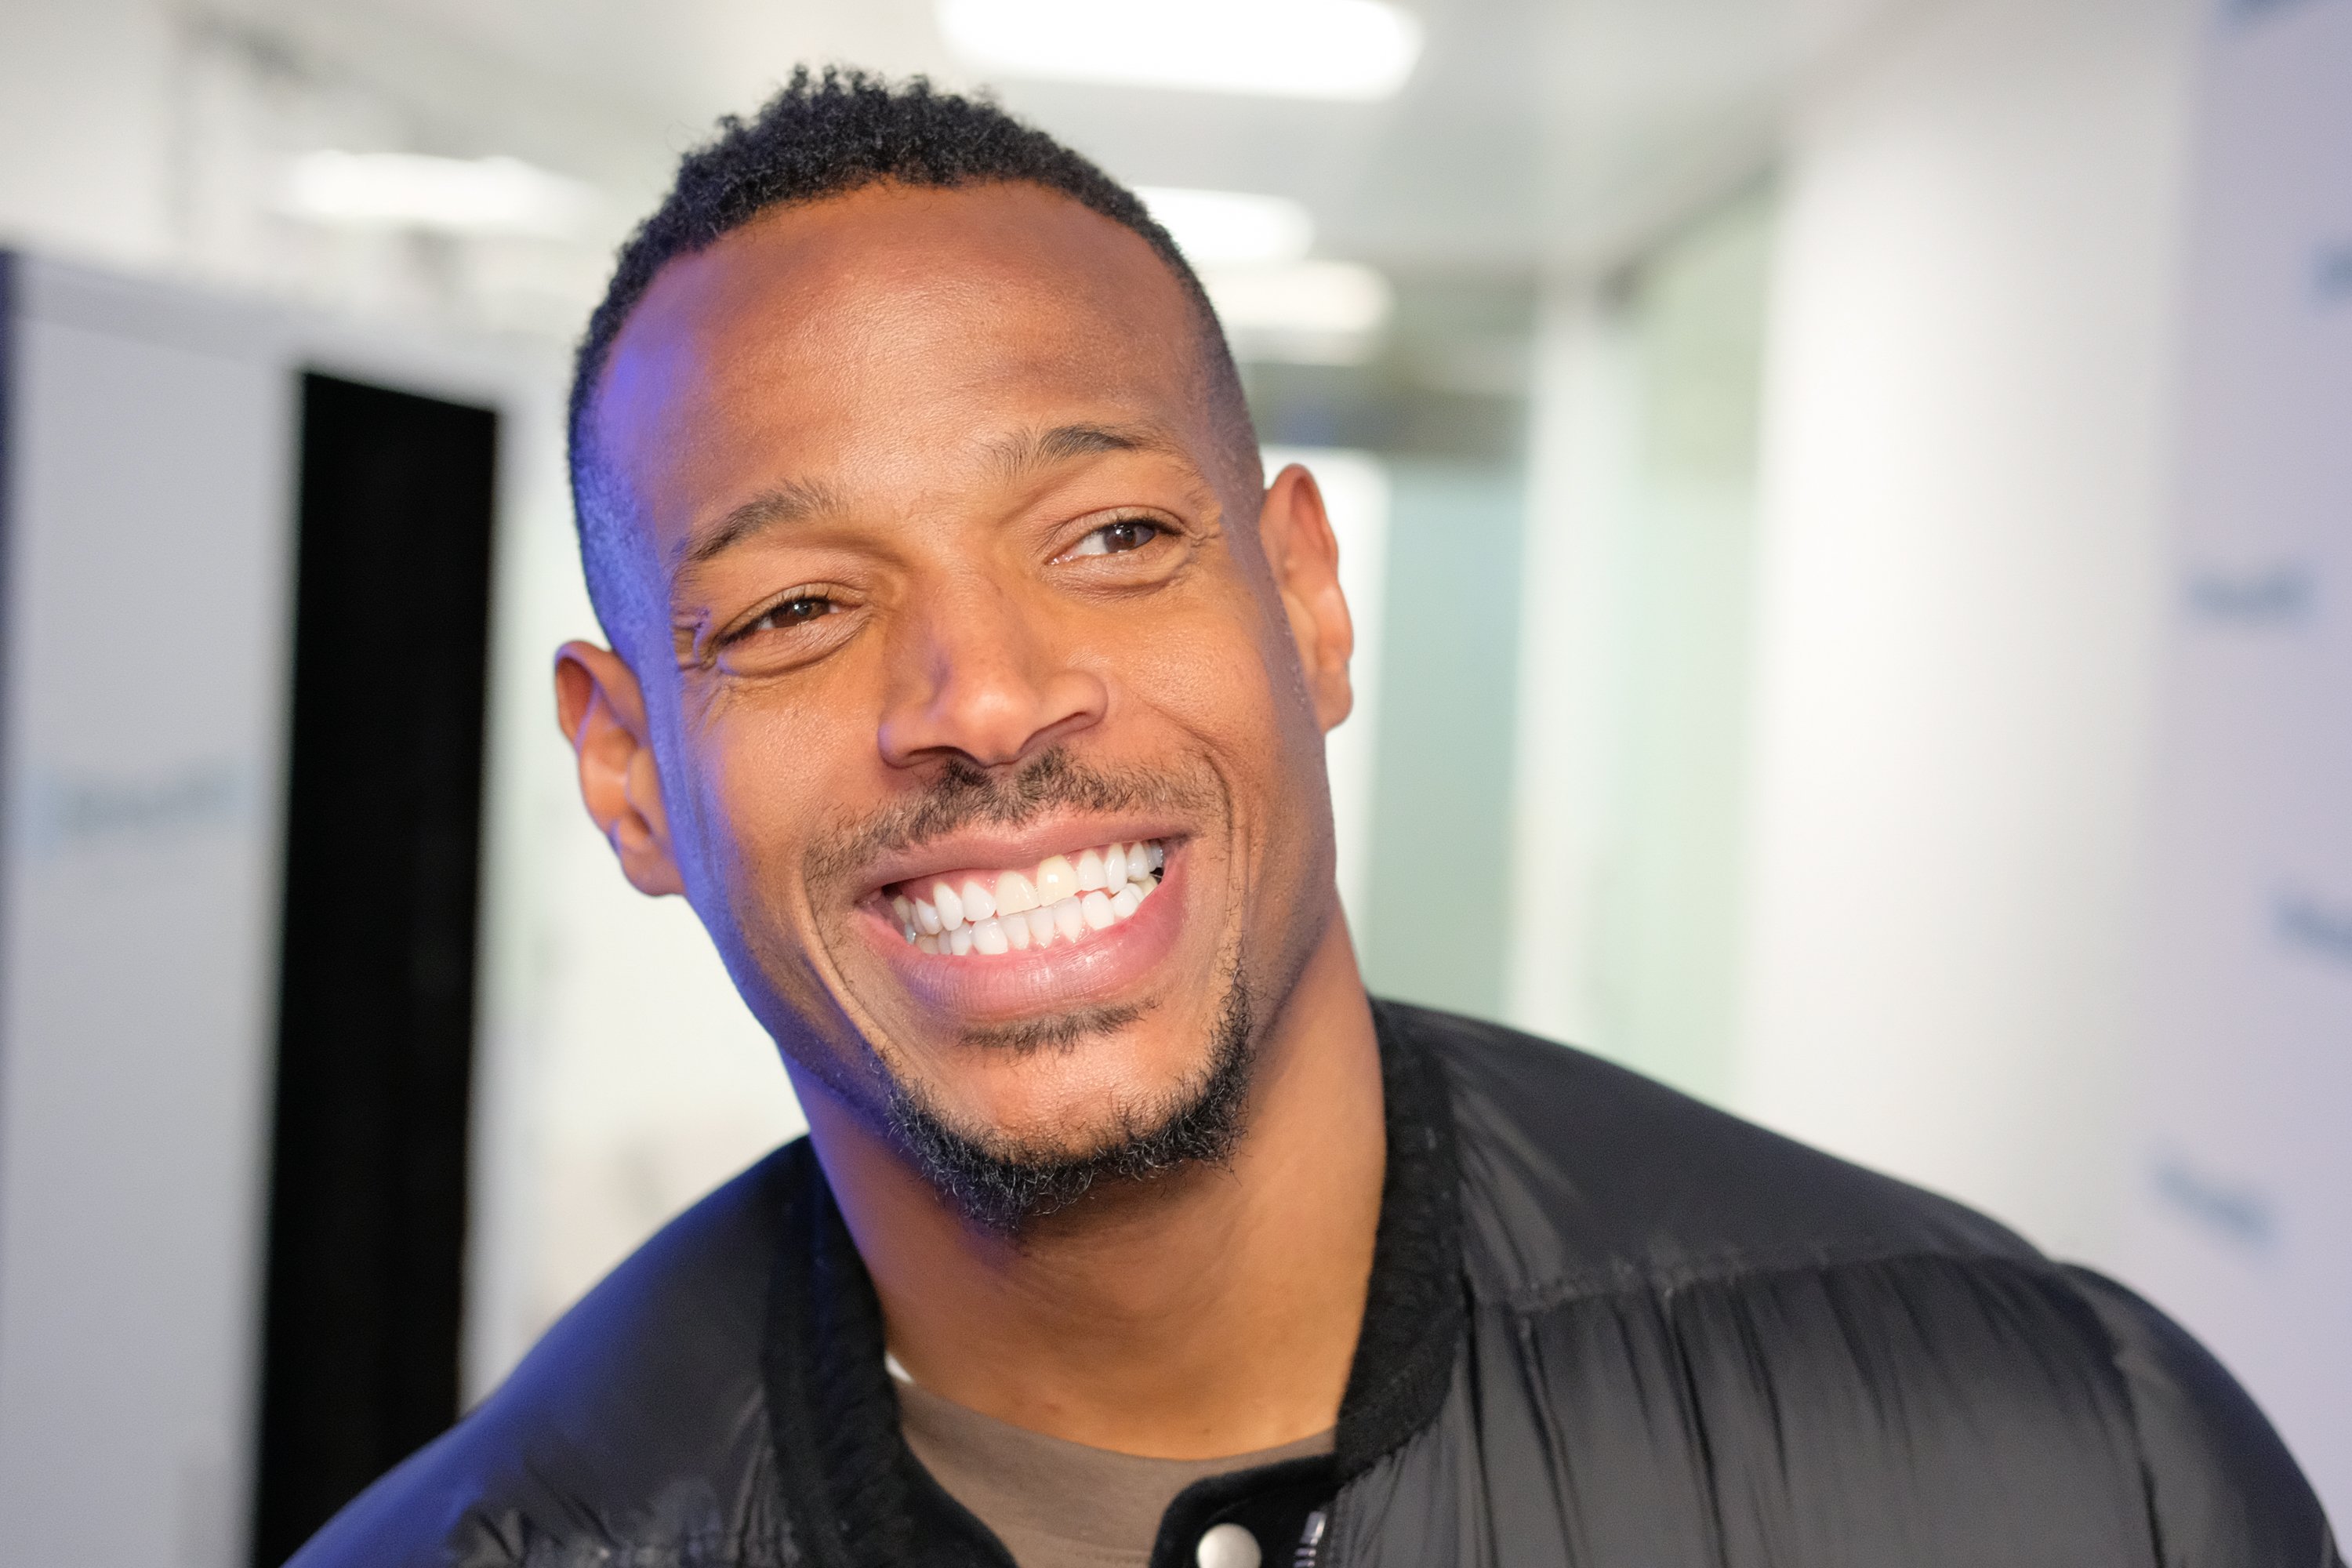 Marlon Wayans visits the SiriusXM Studios on March 2, 2018 in New York City. | Source: Getty Images